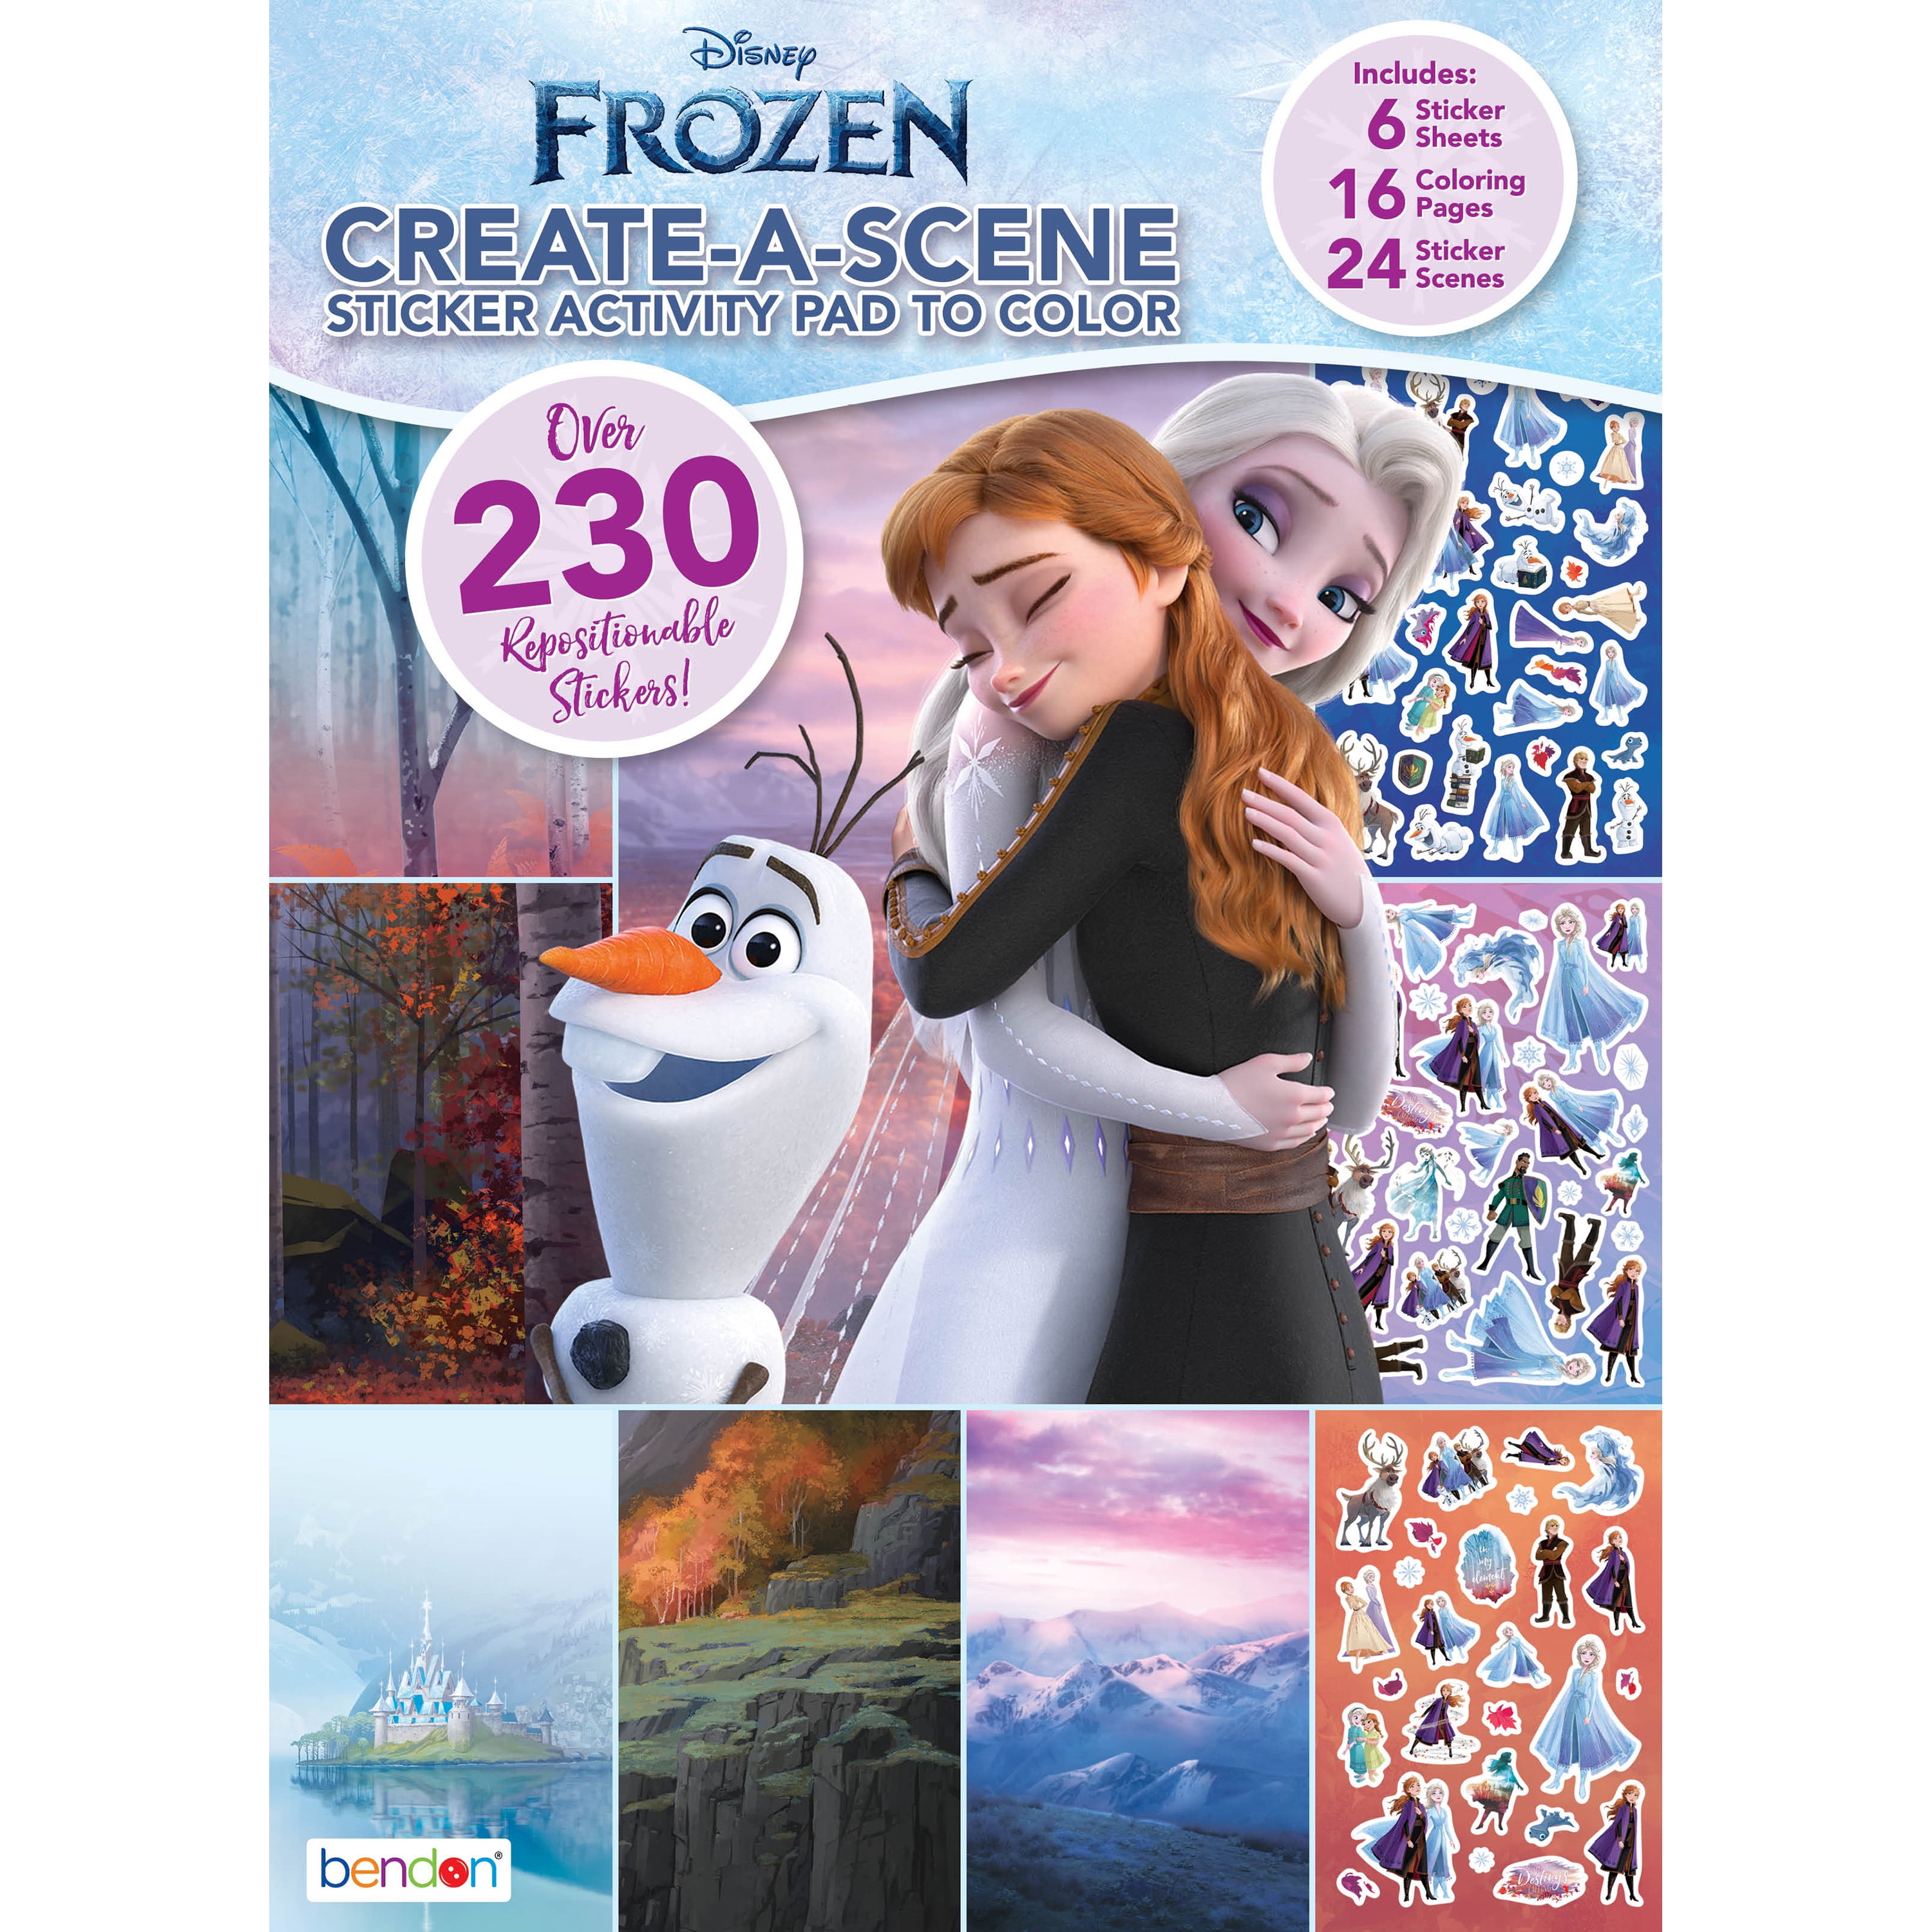 ADHESIVE SCHOOL BOOK LABELS Stickers BRAND NEW DISNEY FROZEN Stationery 